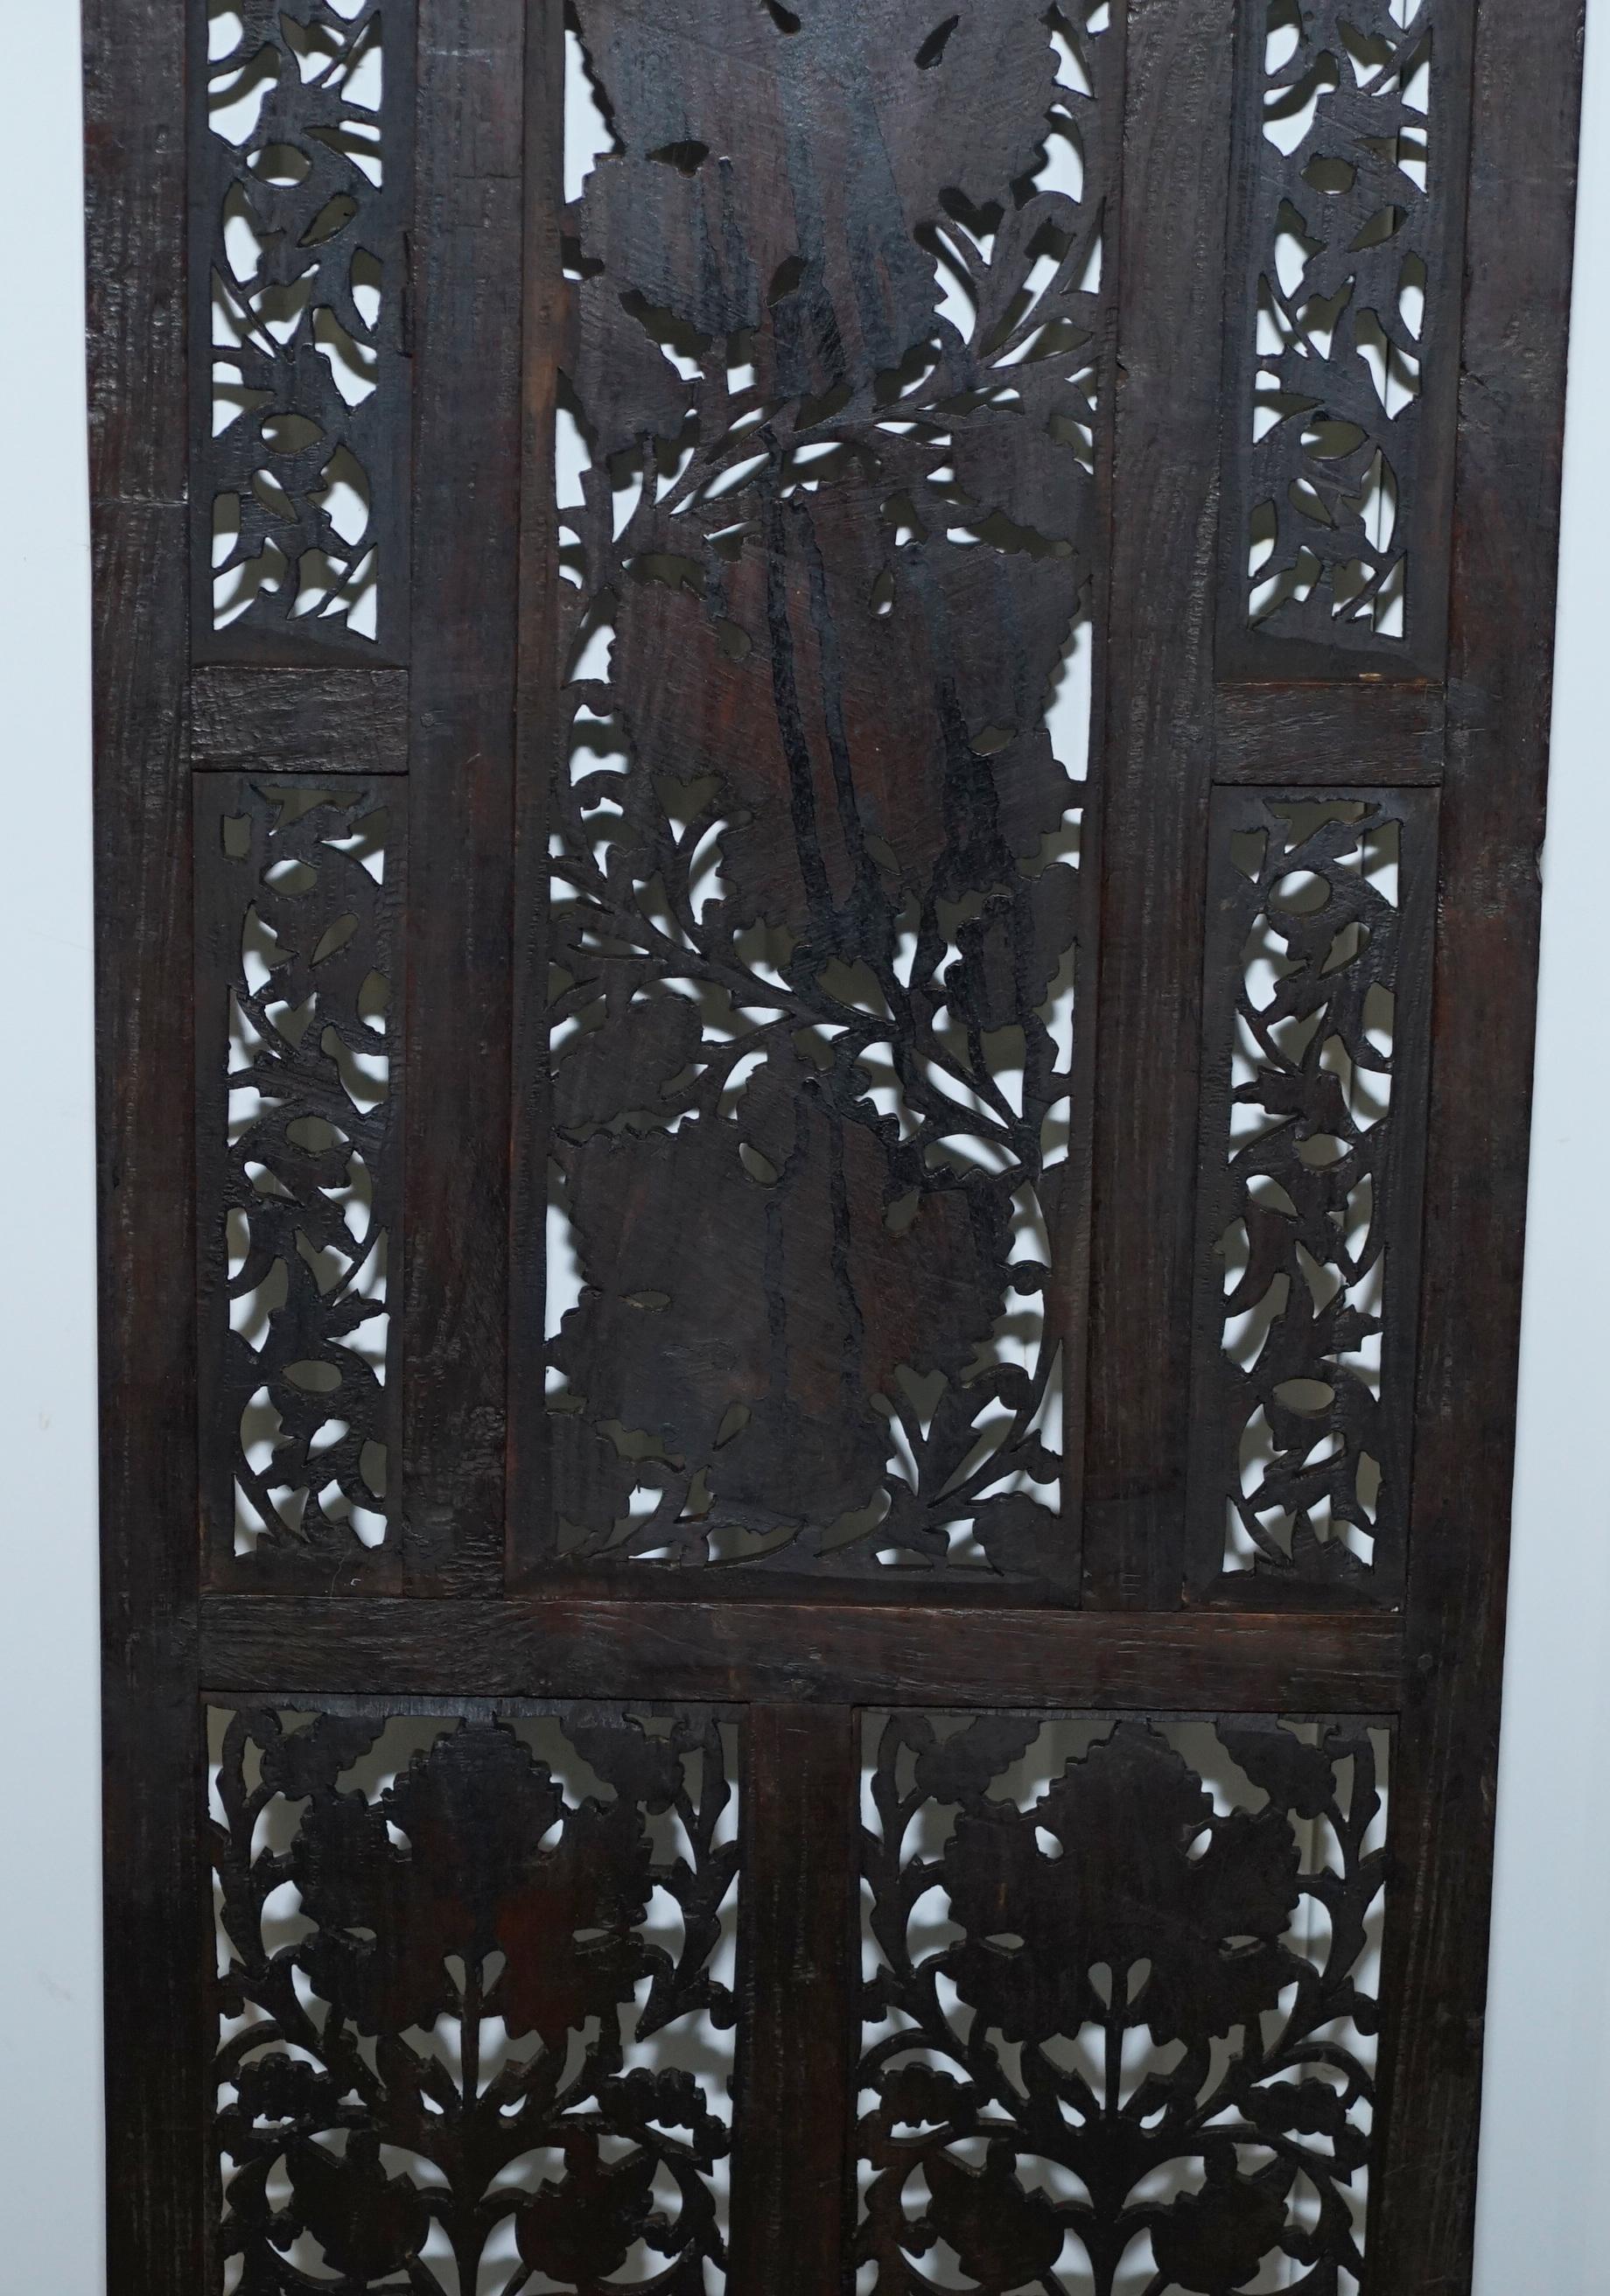 19th Century Rare Chinese Fretwork Carved Wall Panels Depicting Leaves Solid Teak Art Wood